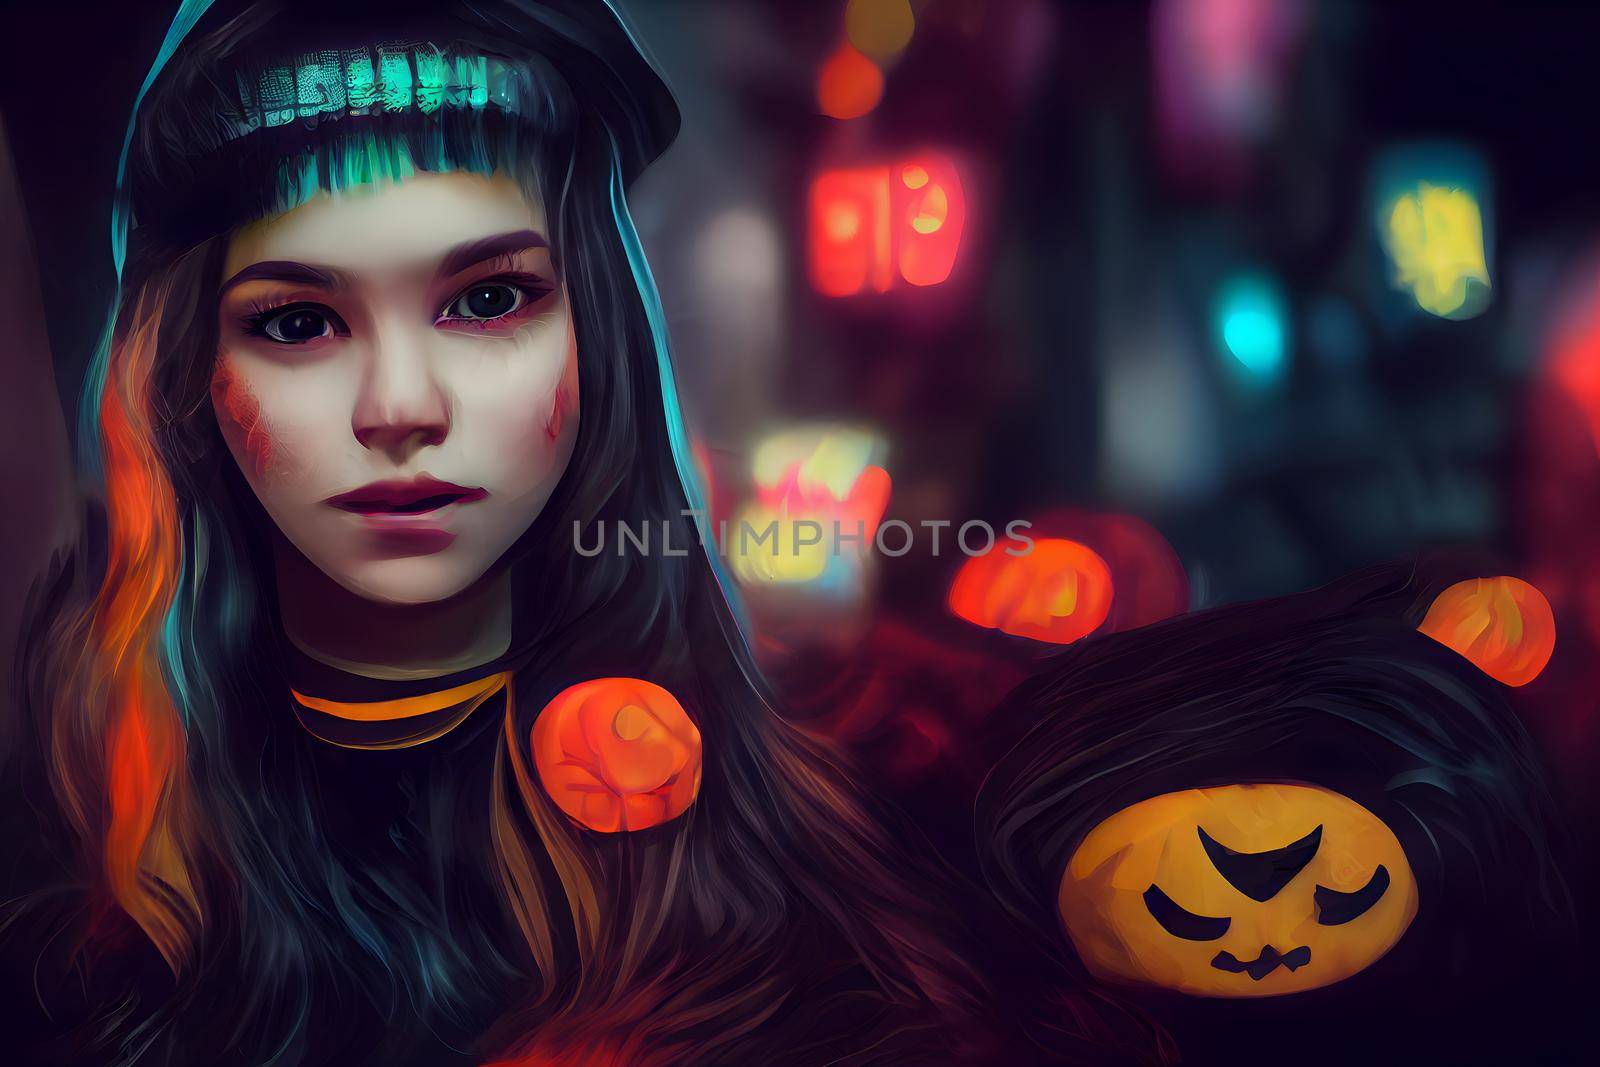 caucasian woman at night in witch costume and makeup, halloween look, neural network generated art by z1b